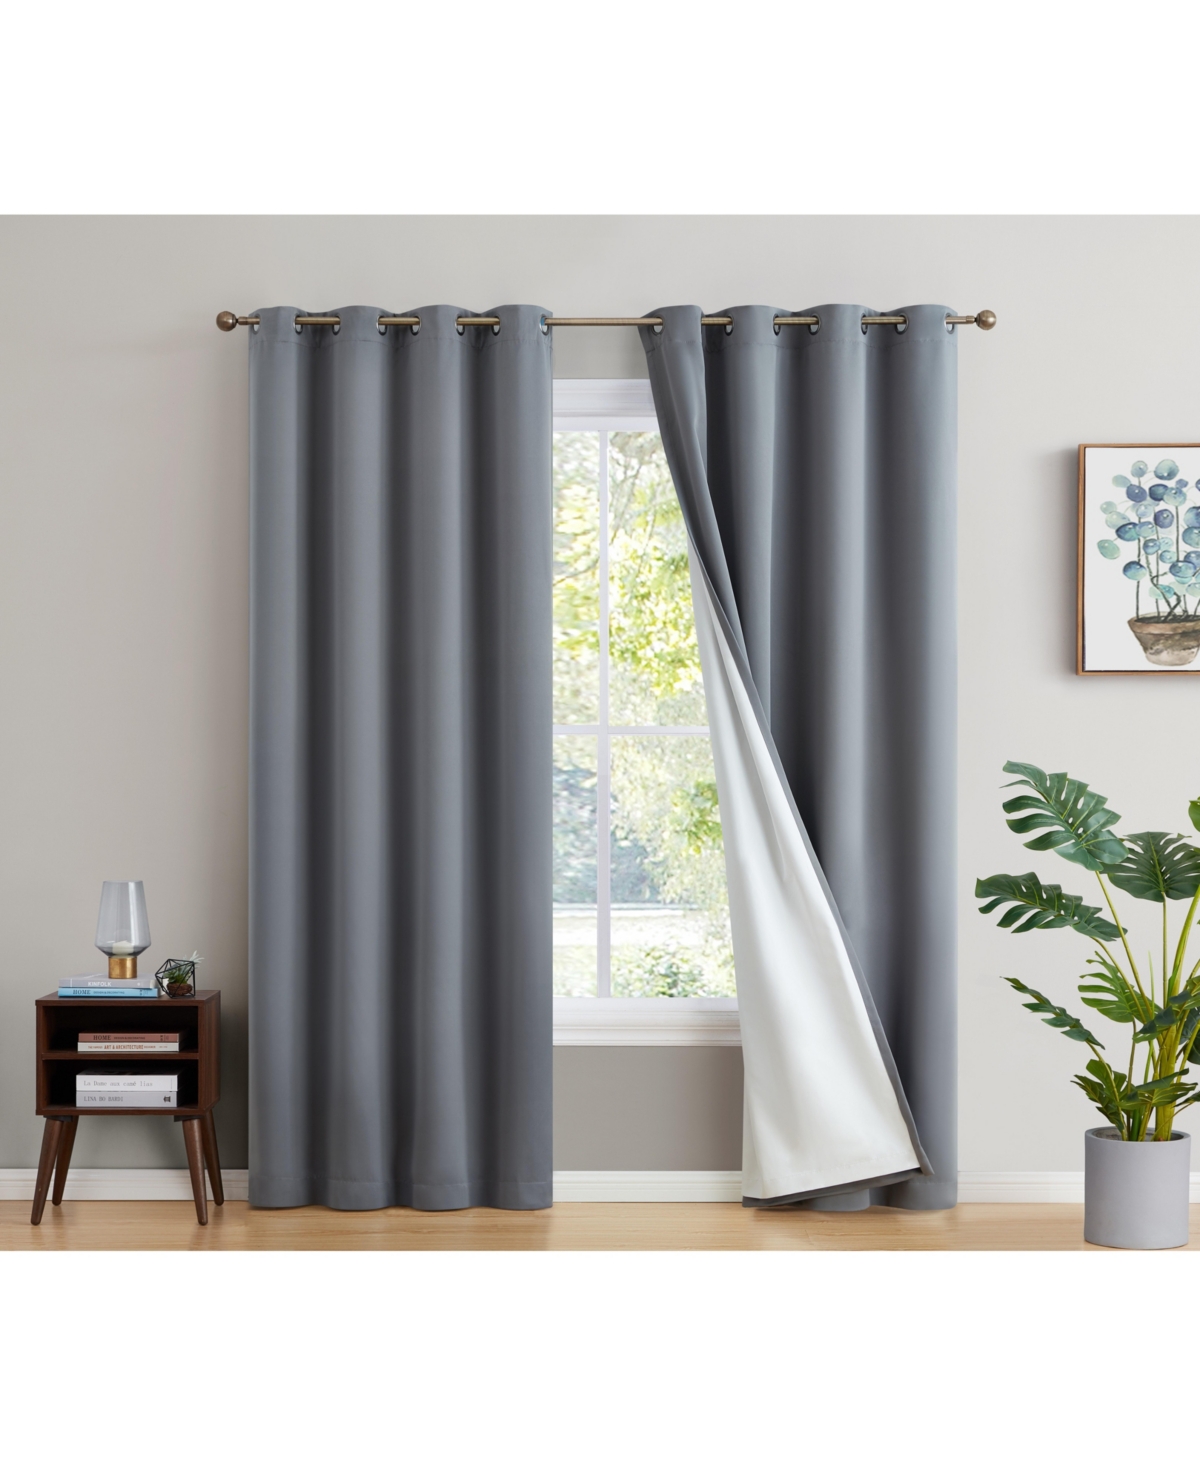 Dakota 100% Complete Blackout Lined Drapery with Double Layer Thermal Insulated Energy Efficient Window Curtain Grommet Panels for Bedroom & Li